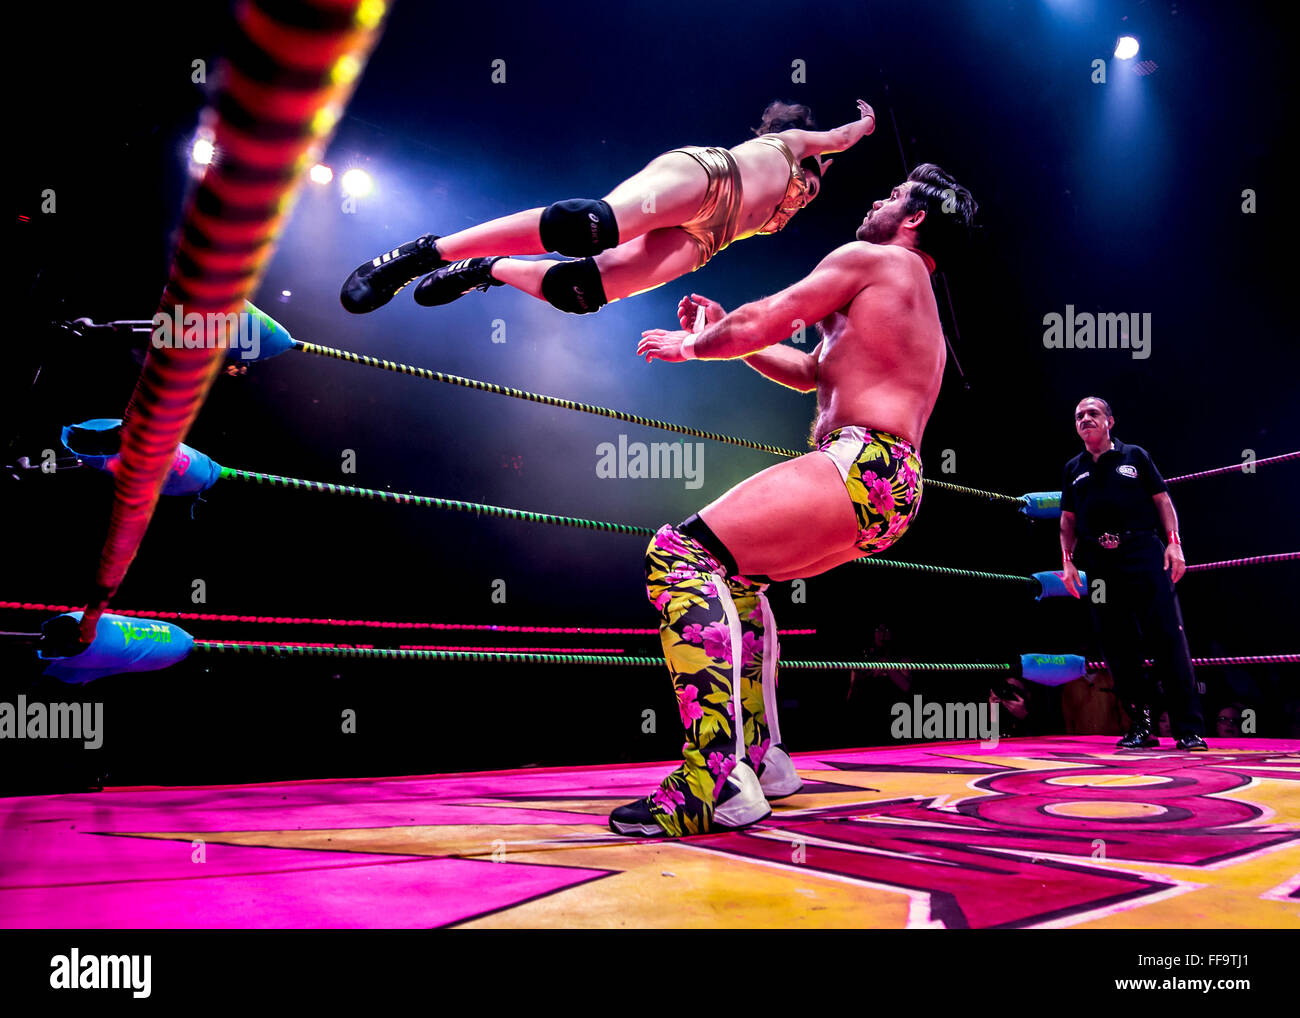 Feb. 10, 2016 - Los Angeles, California, U.S. -  Lucha VaVOOM, a raucus mashup of Mexican masked wrestling and saucy striptease, presents ''Crazy in Love,'' their 2016 Valentine's Day show running for two nights at the historic Mayan Theatre in downtown Los Angeles.(Credit Image: © Brian Cahn via ZUMA Wire) Stock Photo